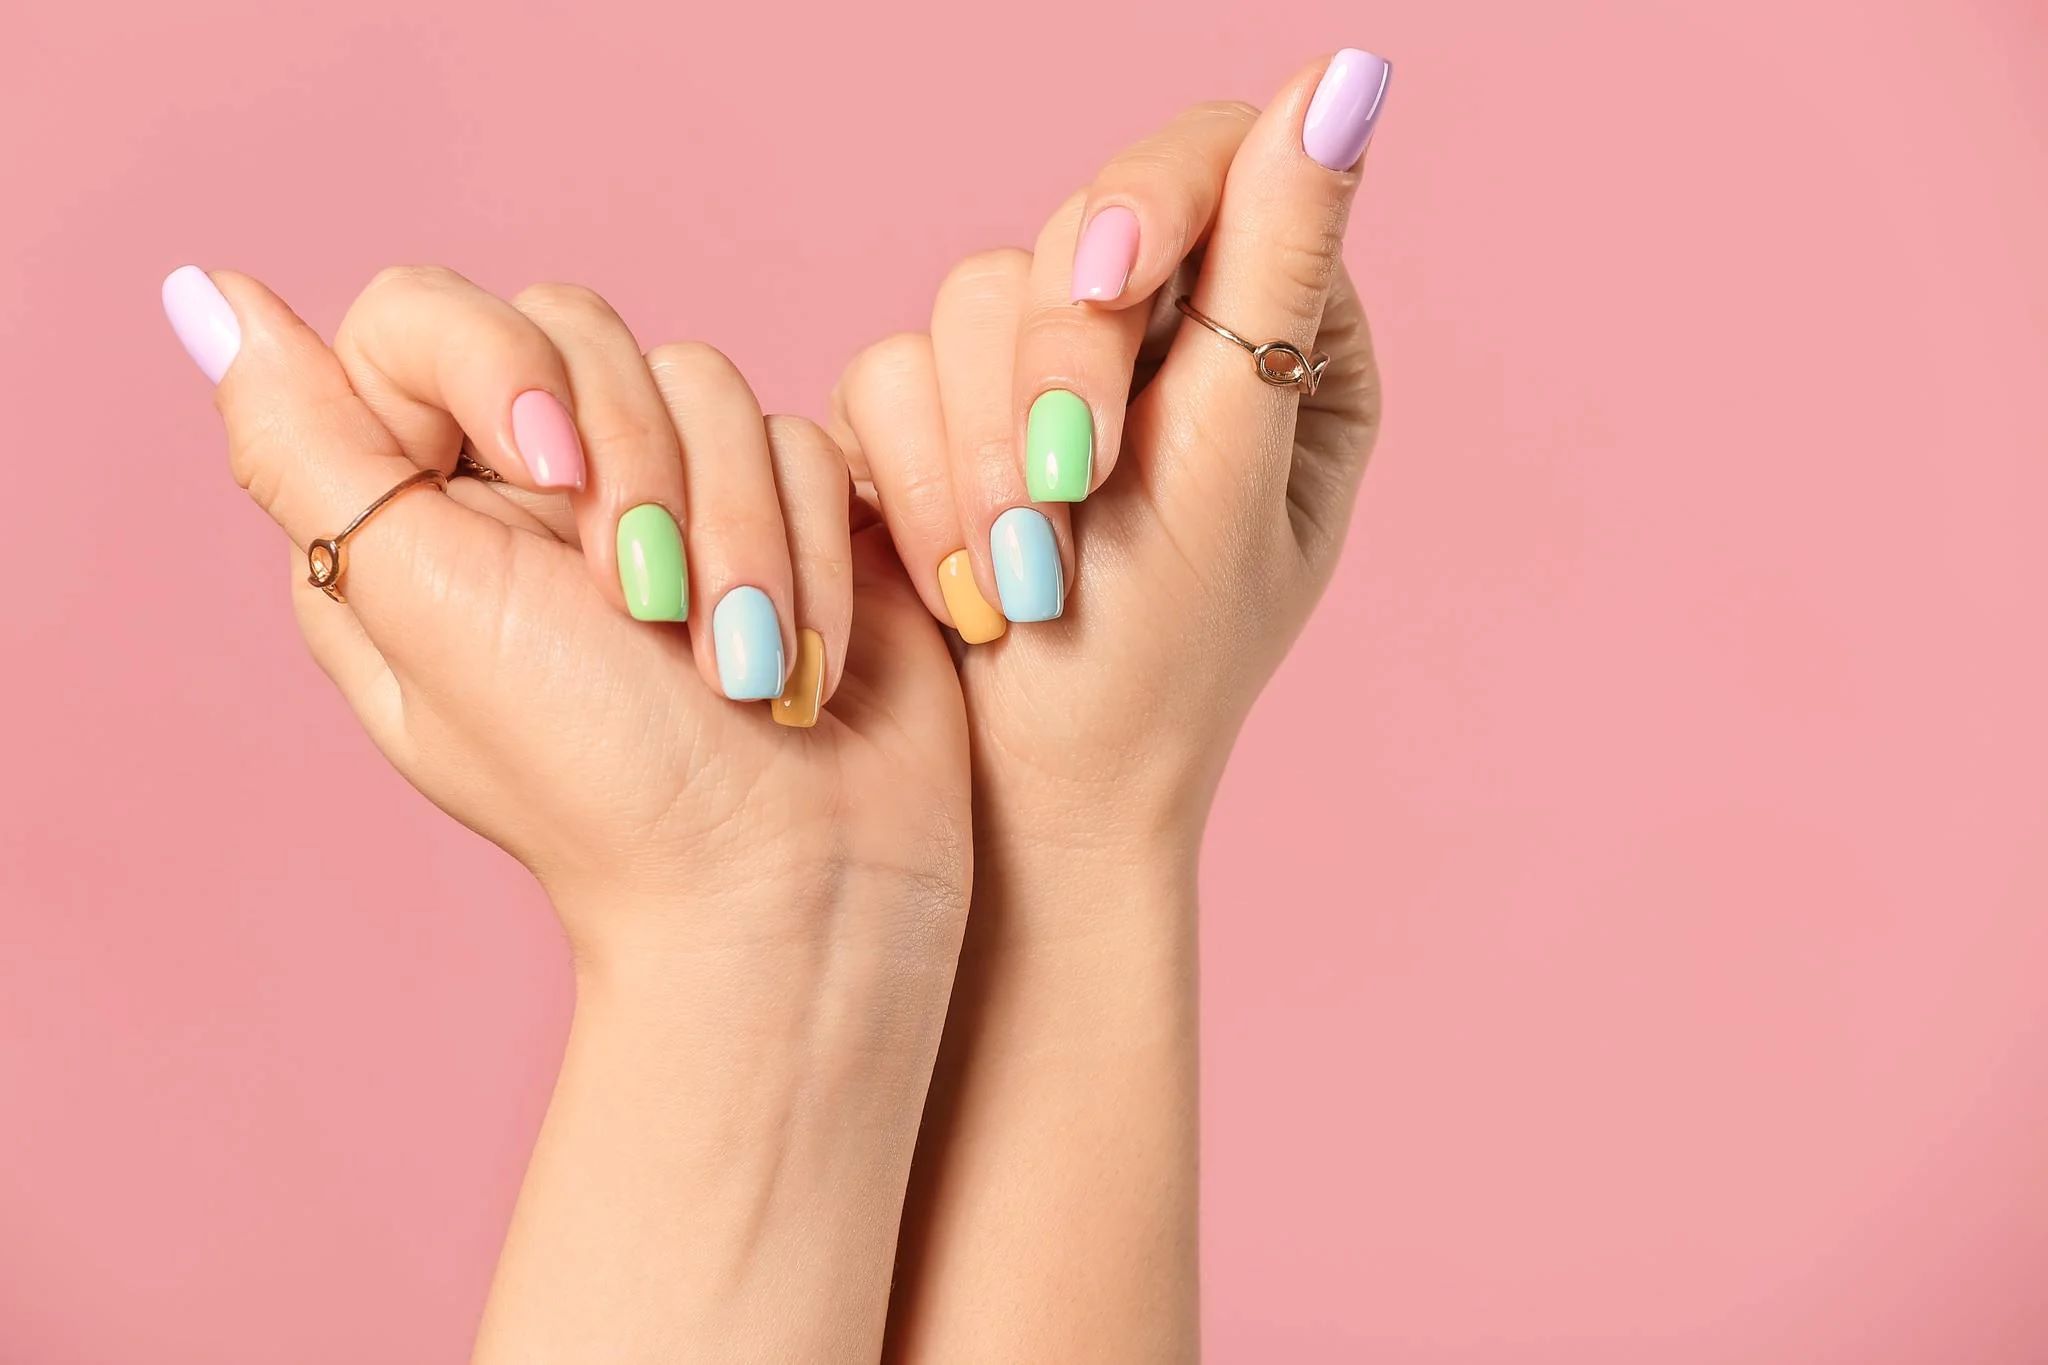 Create Your Own Custom Gel Polish Color By Mixing Different Brands!